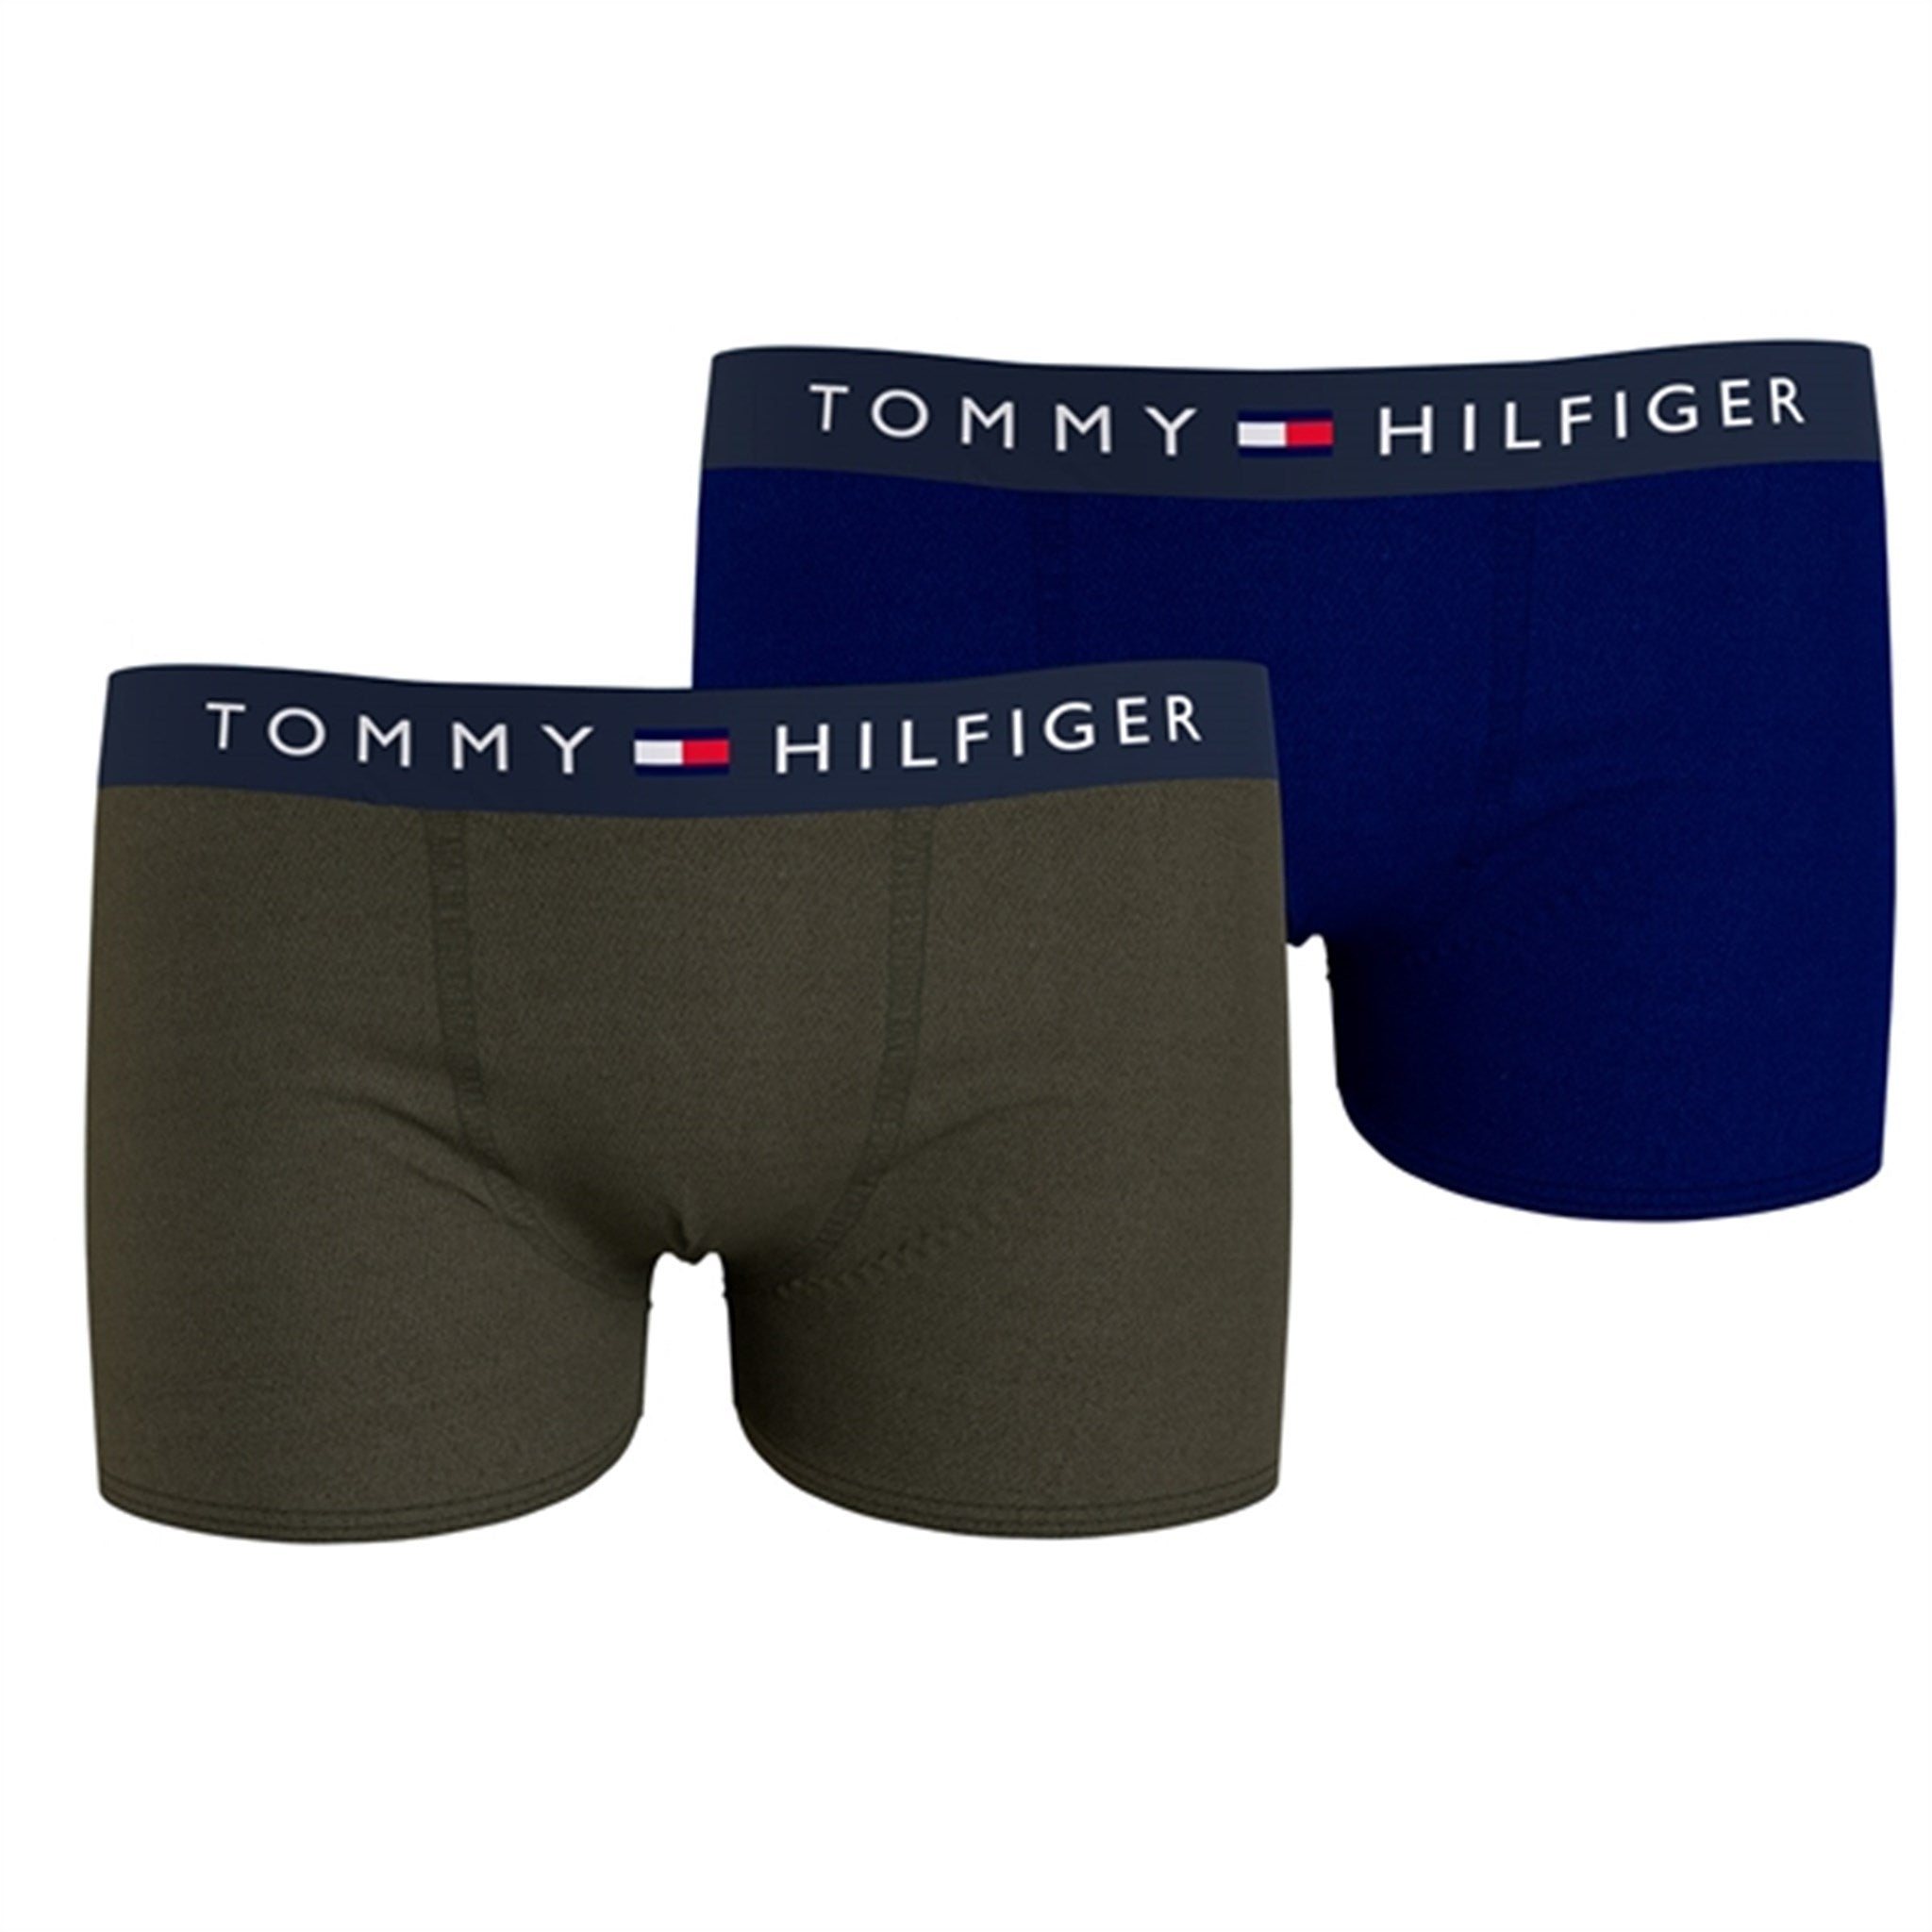 Tommy Hilfiger Boxershorts 2-pack Army Green/Yale Navy